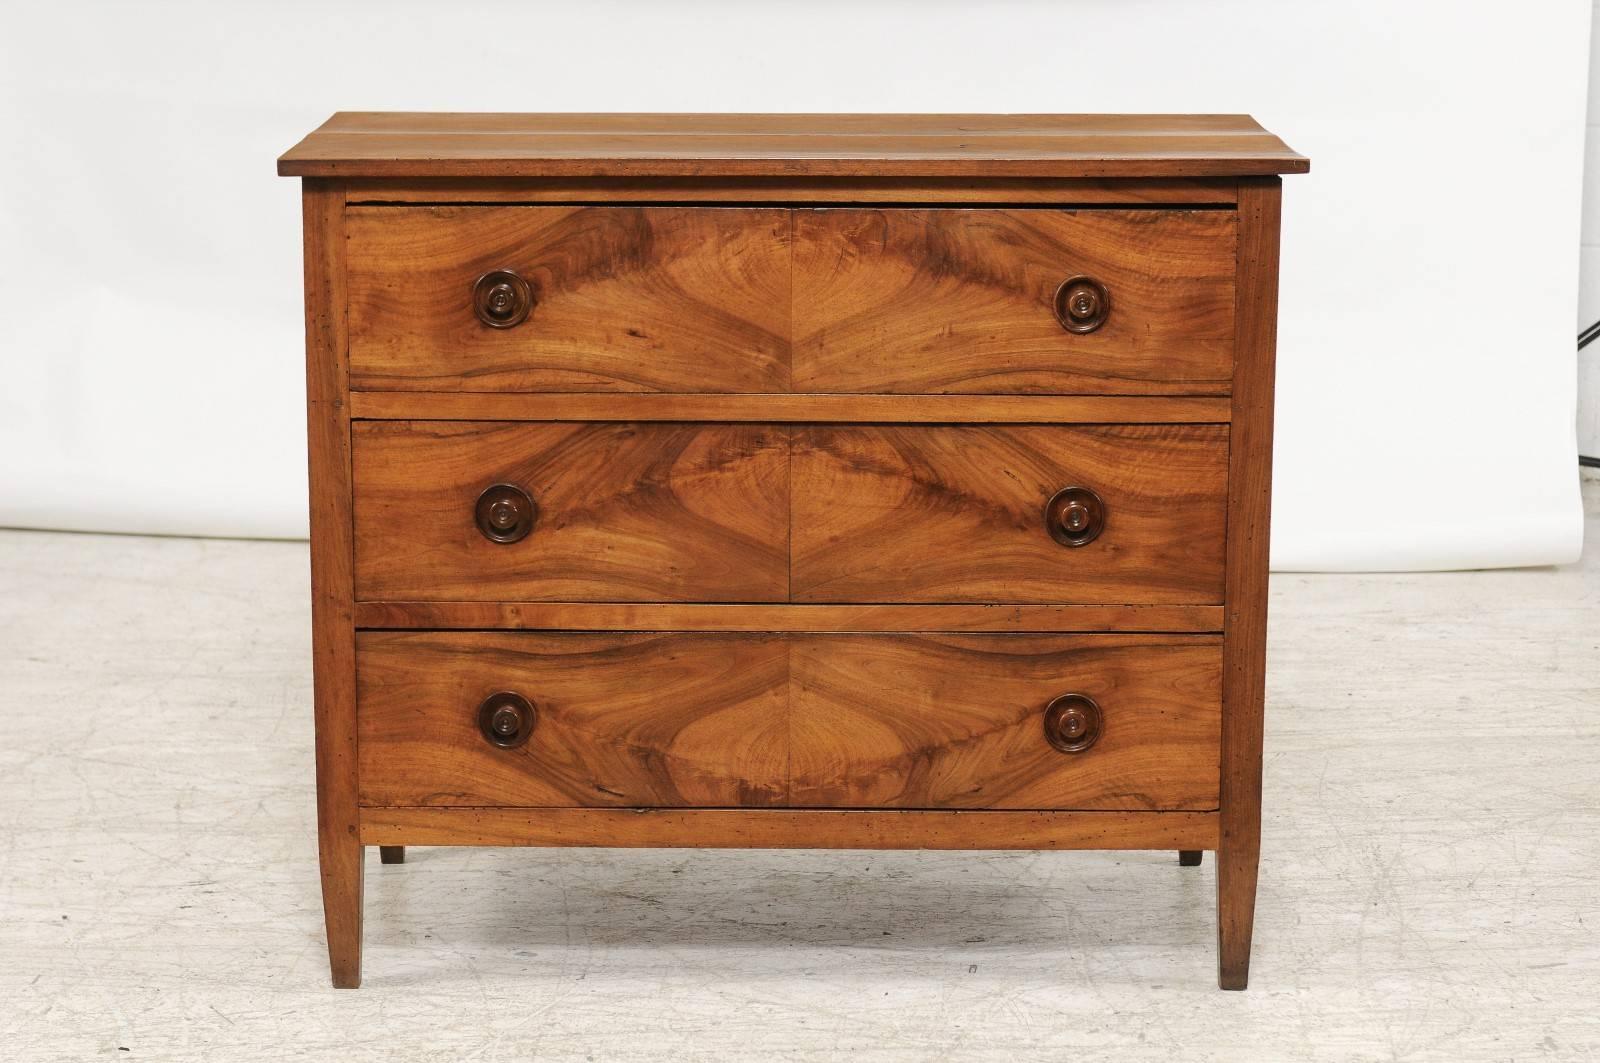 A French Directoire period three-drawer commode with bookmarked walnut veneer from the late 18th century. This French commode was born in the later years of the 18th century, during the troubled times that followed the French Revolution. The chest